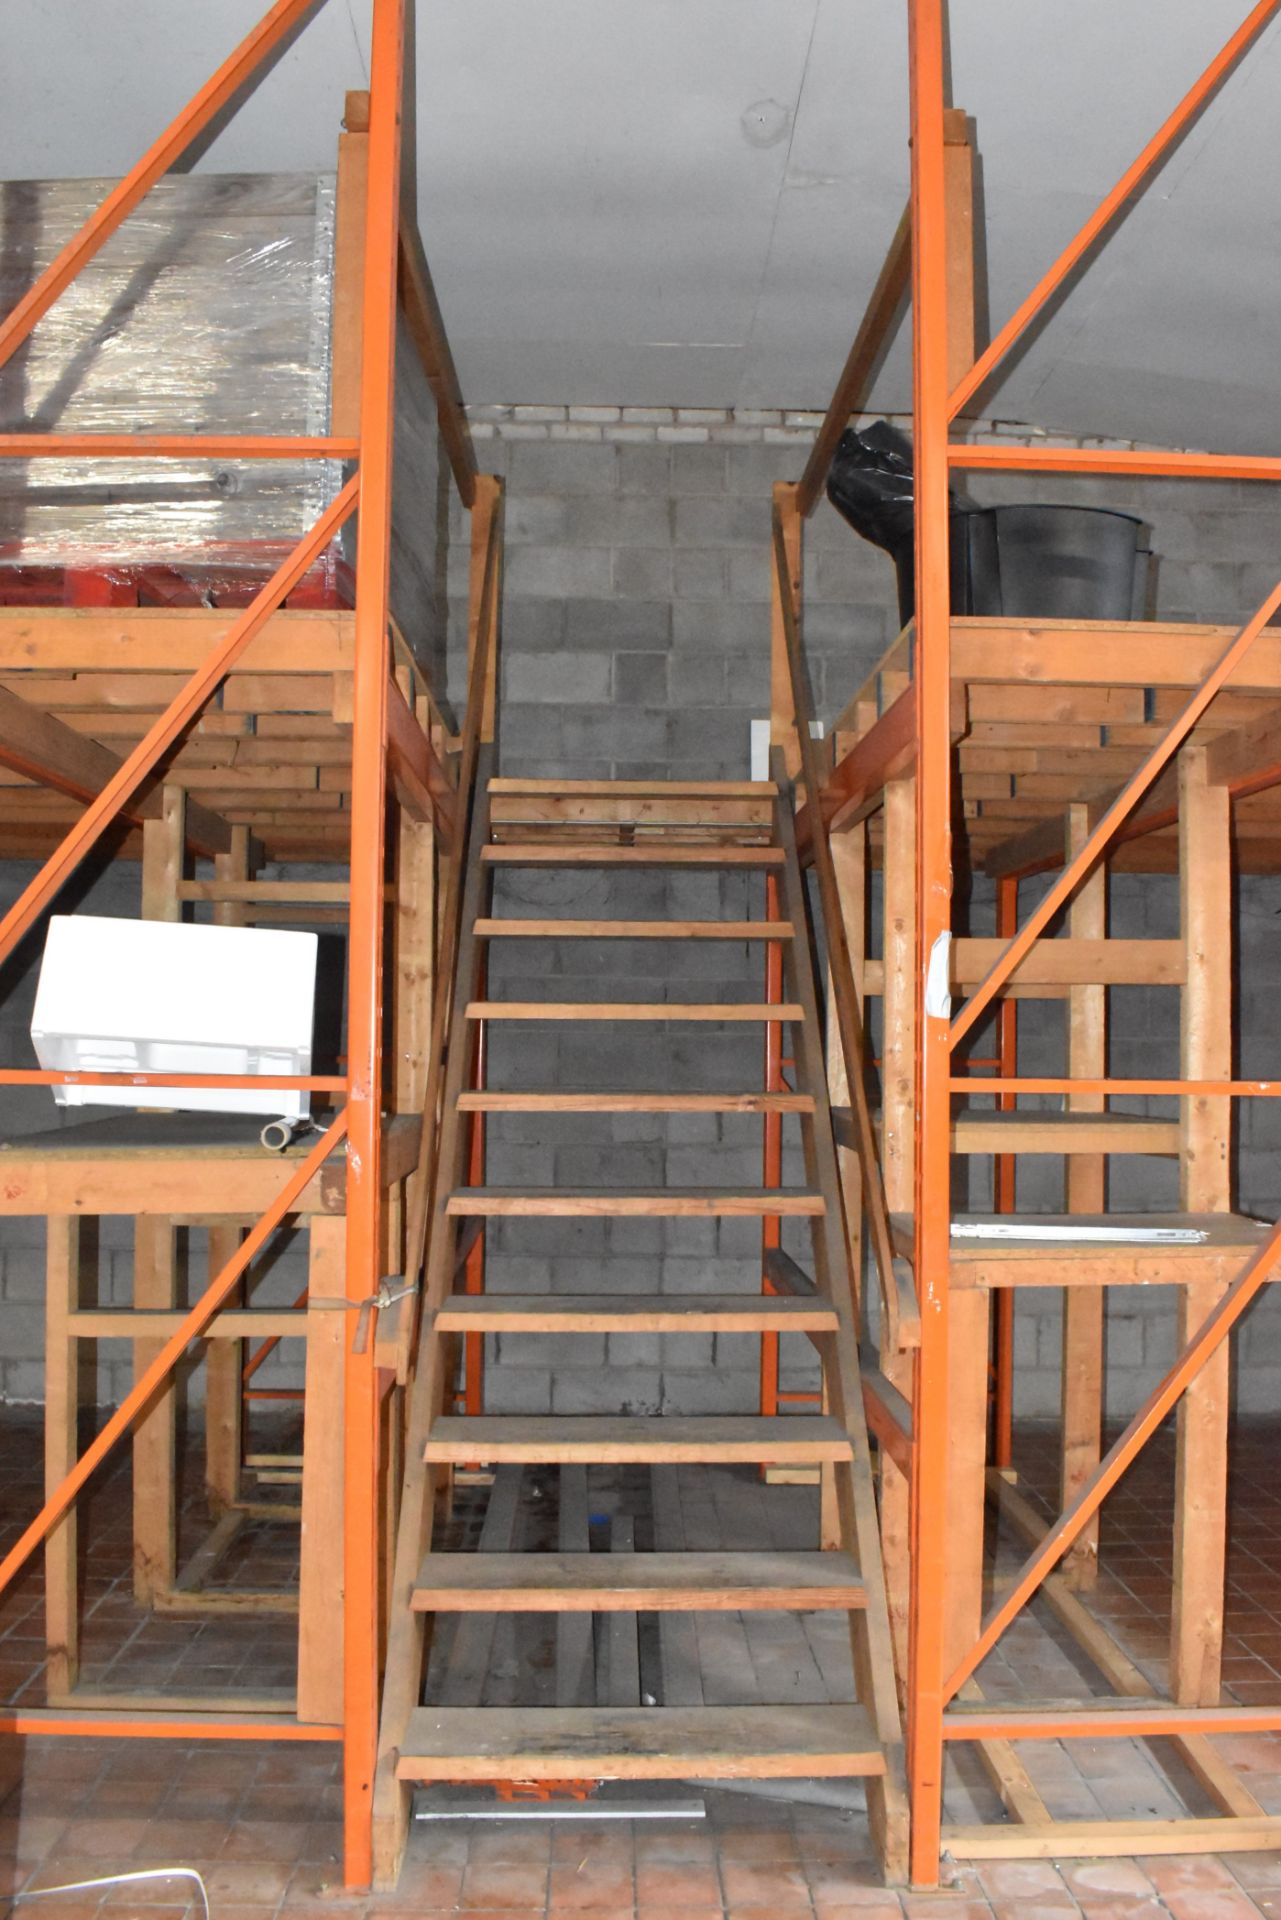 1 x Mezzanine Floor Construction of Steel Racking and Timber - Includes Staircase - Size: W11m x D3m - Image 13 of 18